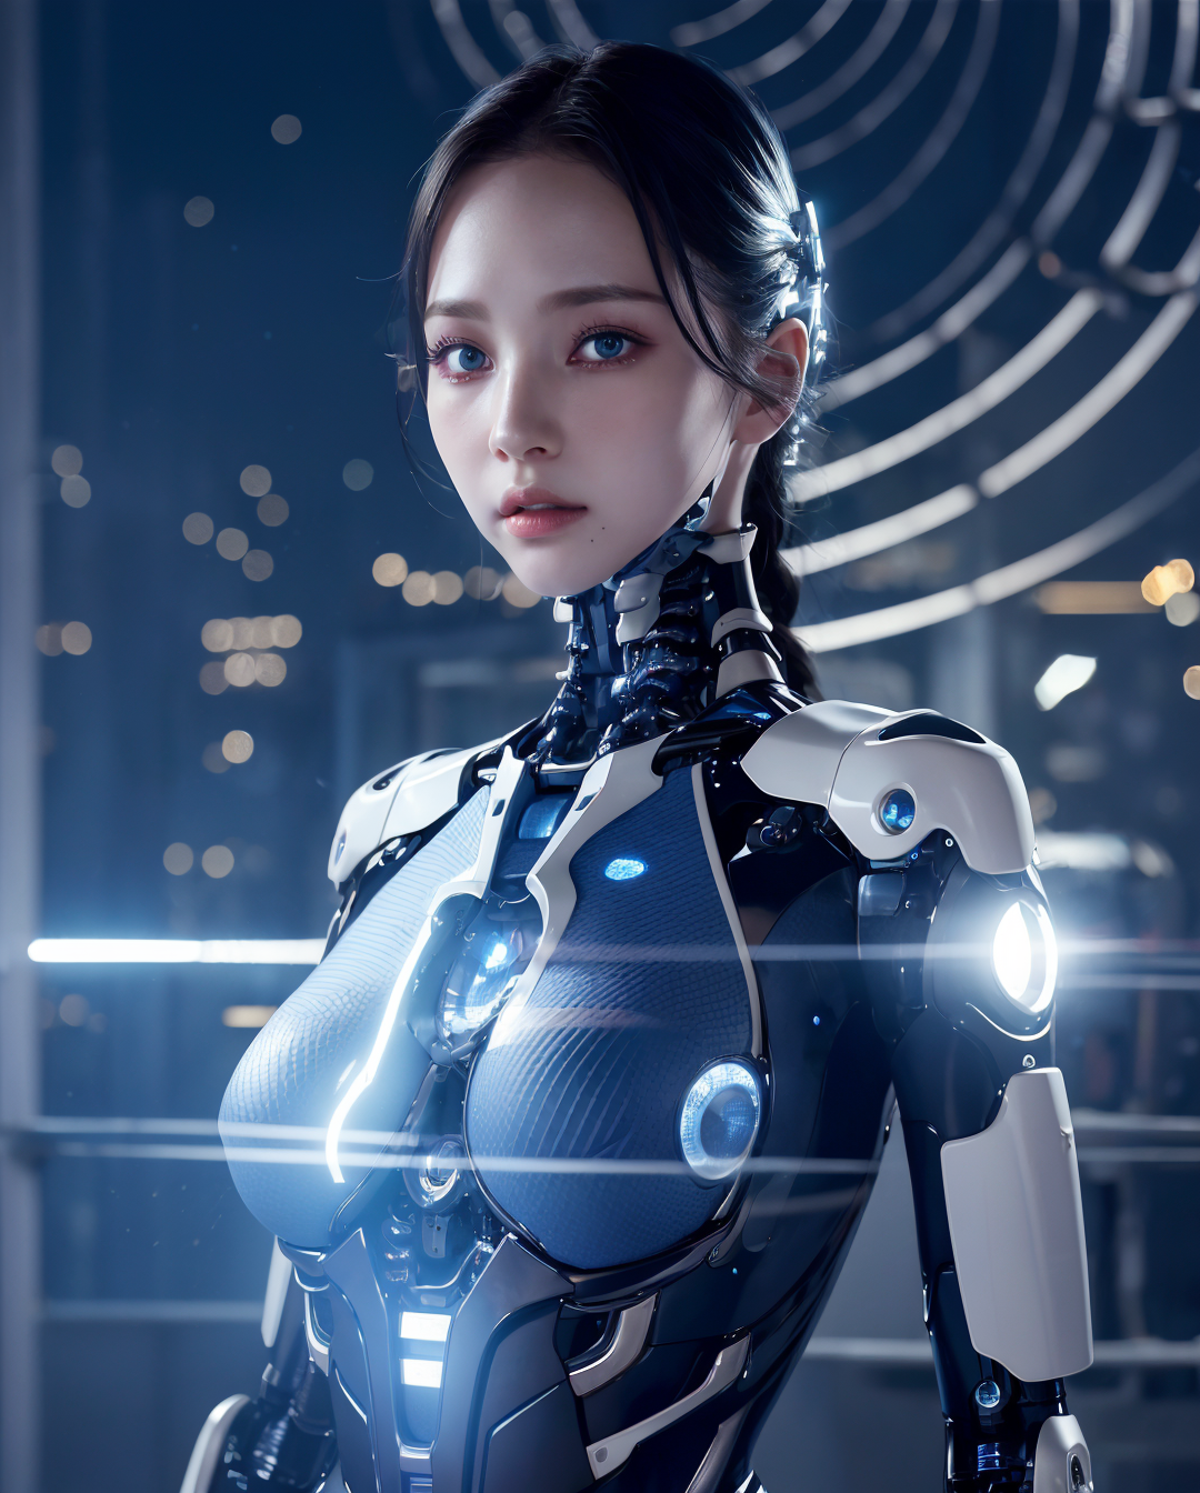 AI model image by AllanYejin